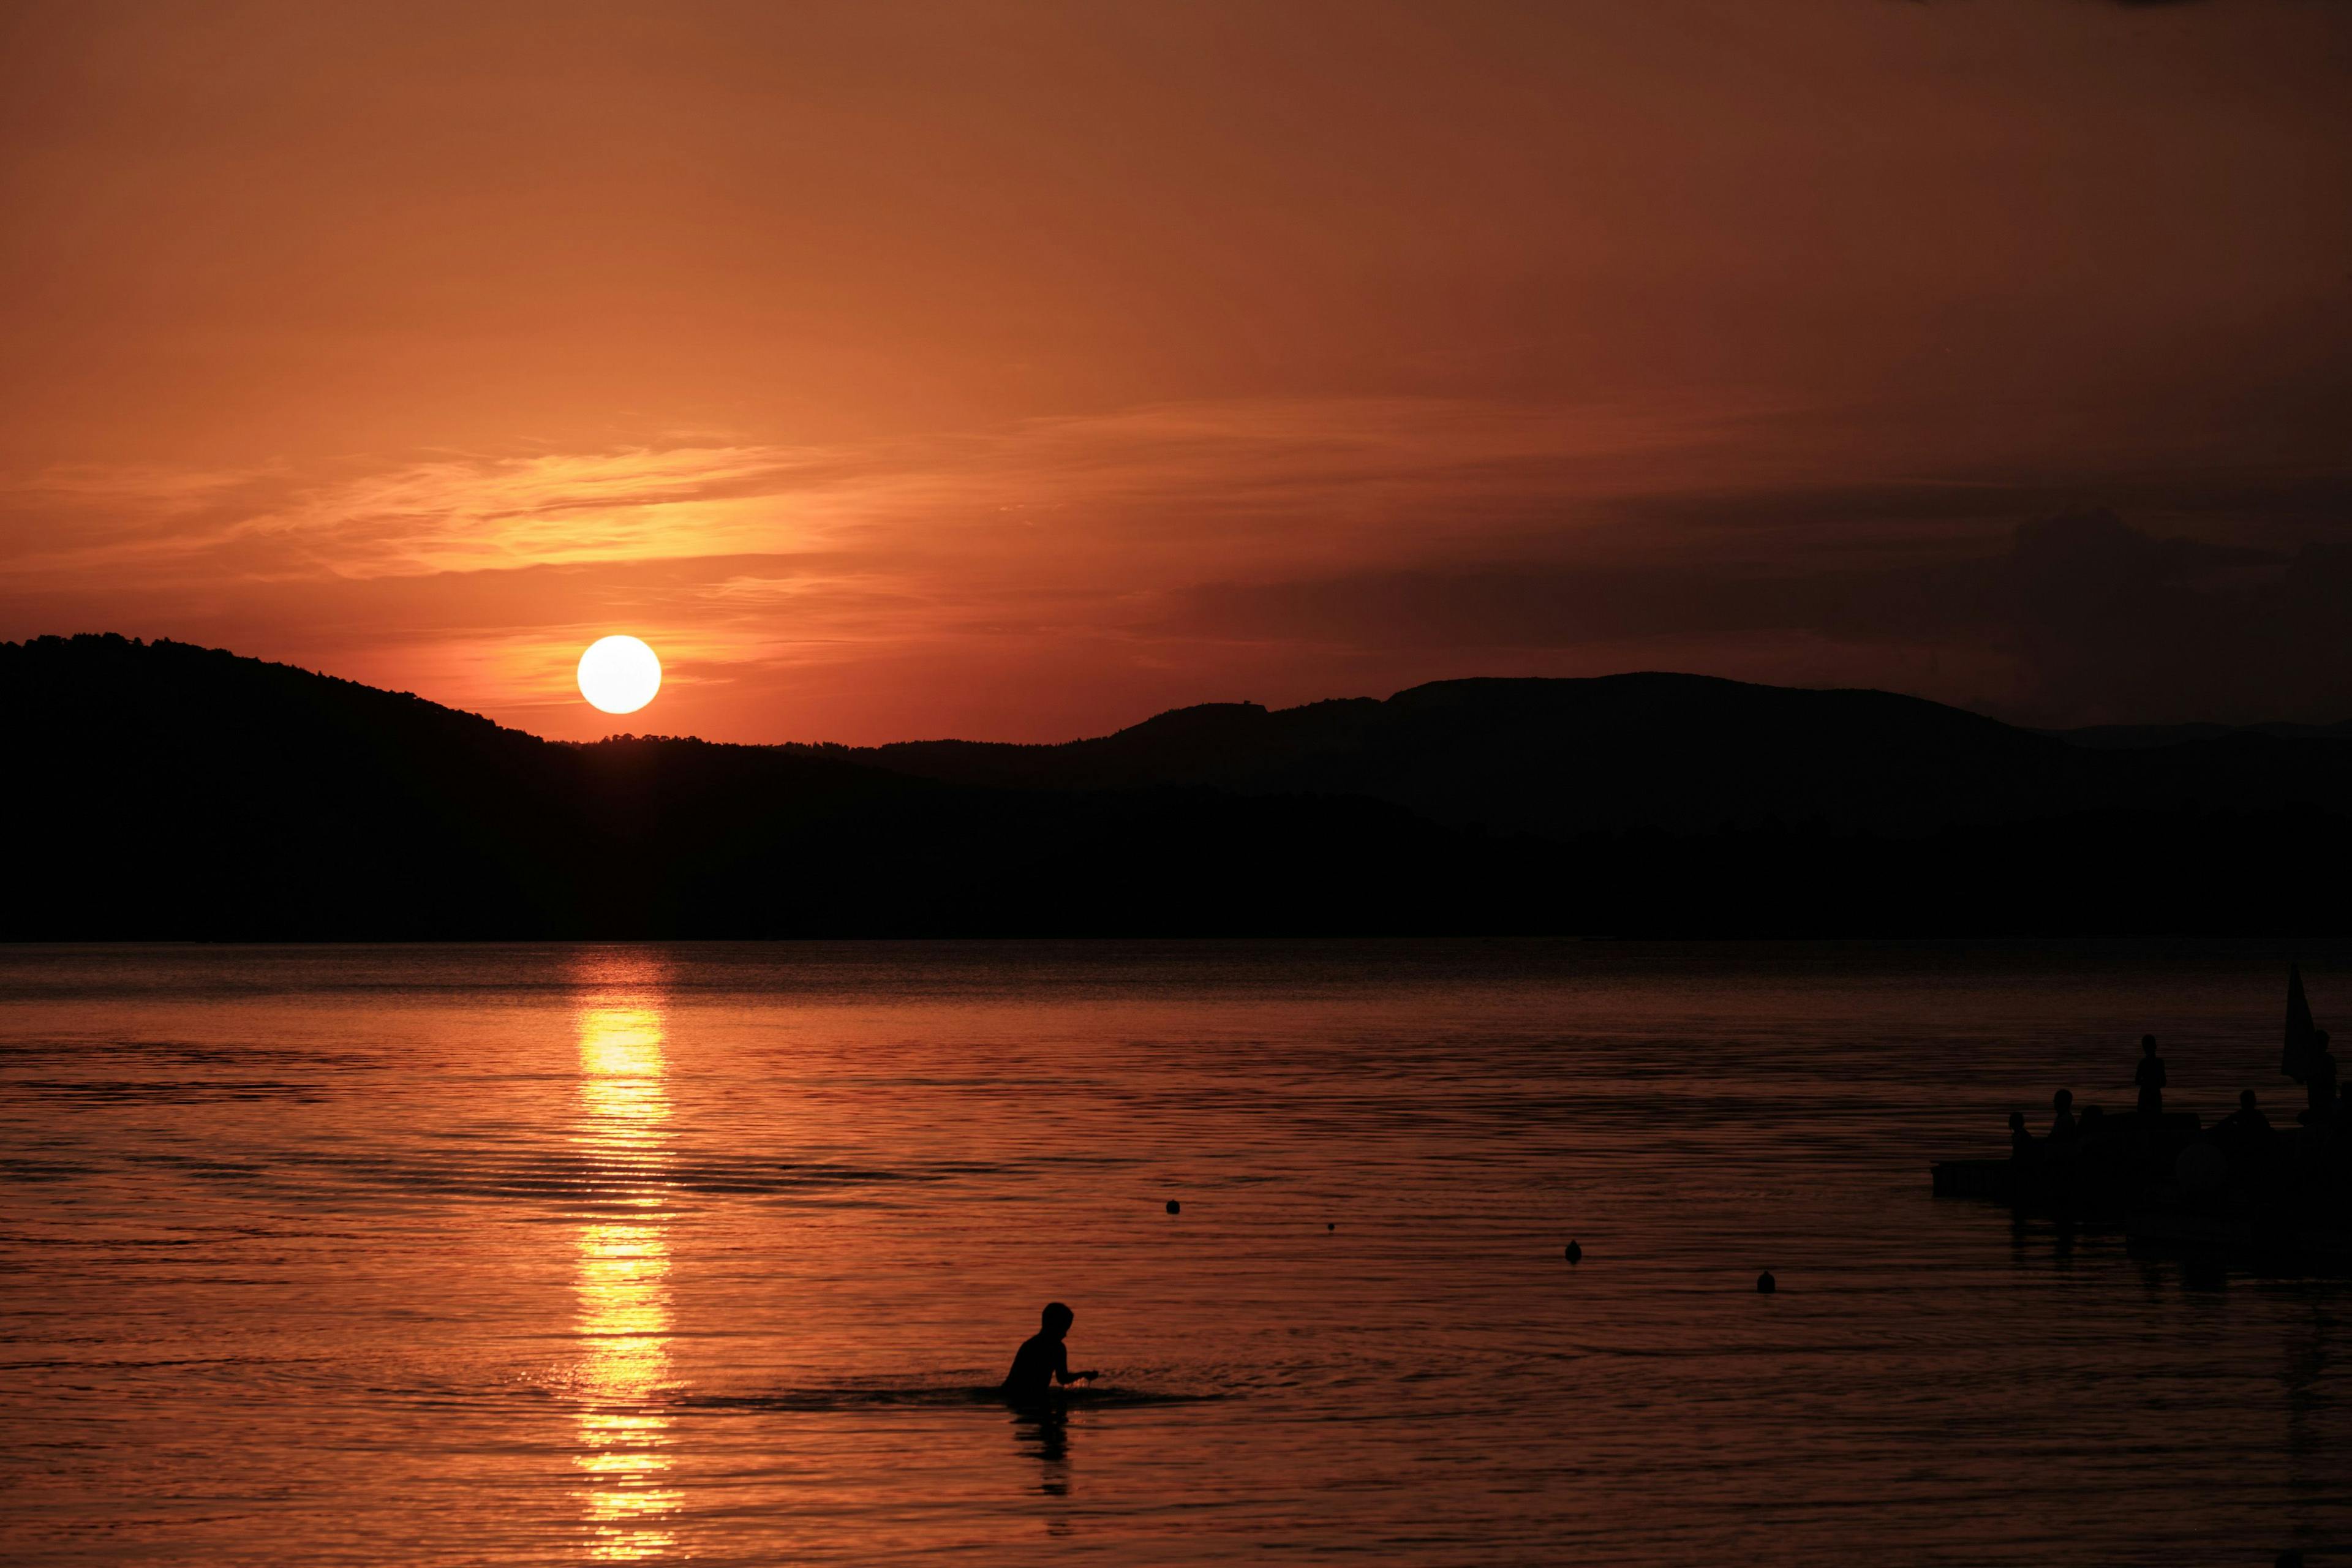 A sunset that has turned the sky and sea orange. A lone figure plays in the water.